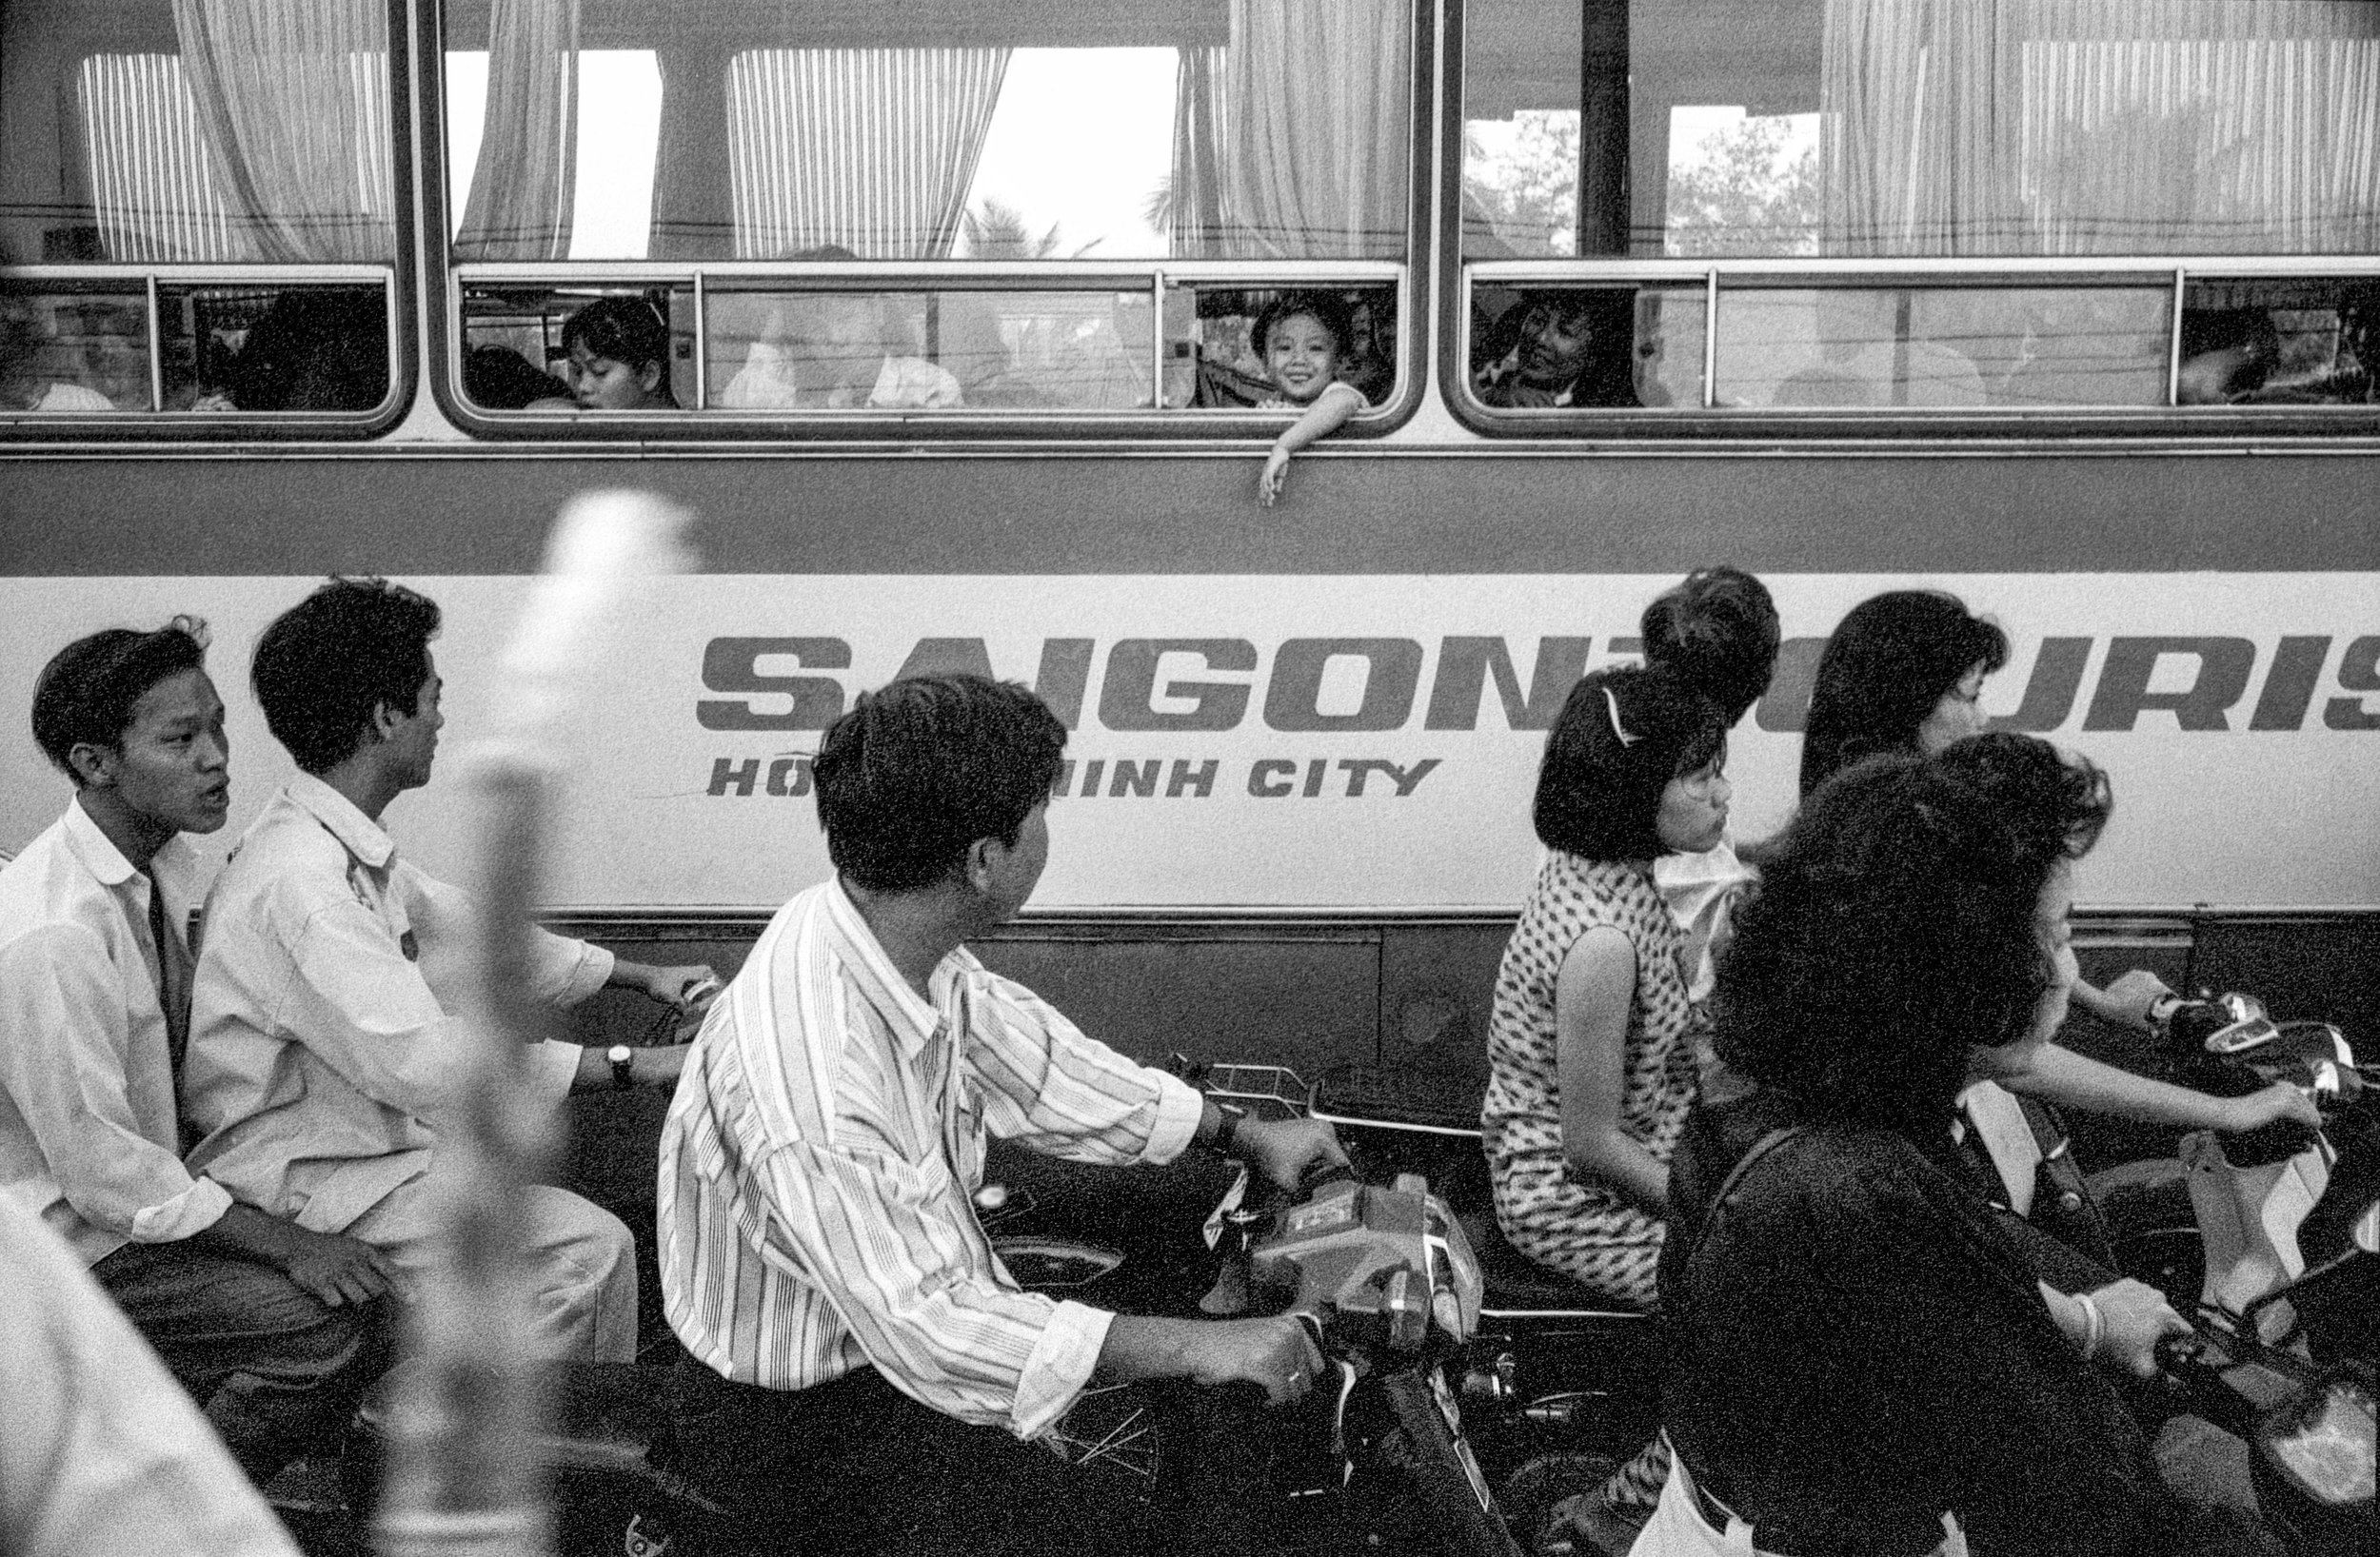  A young boy on a bus looks out the window and smiles, as traffic grinds to a halt in the streets of Saigon.  